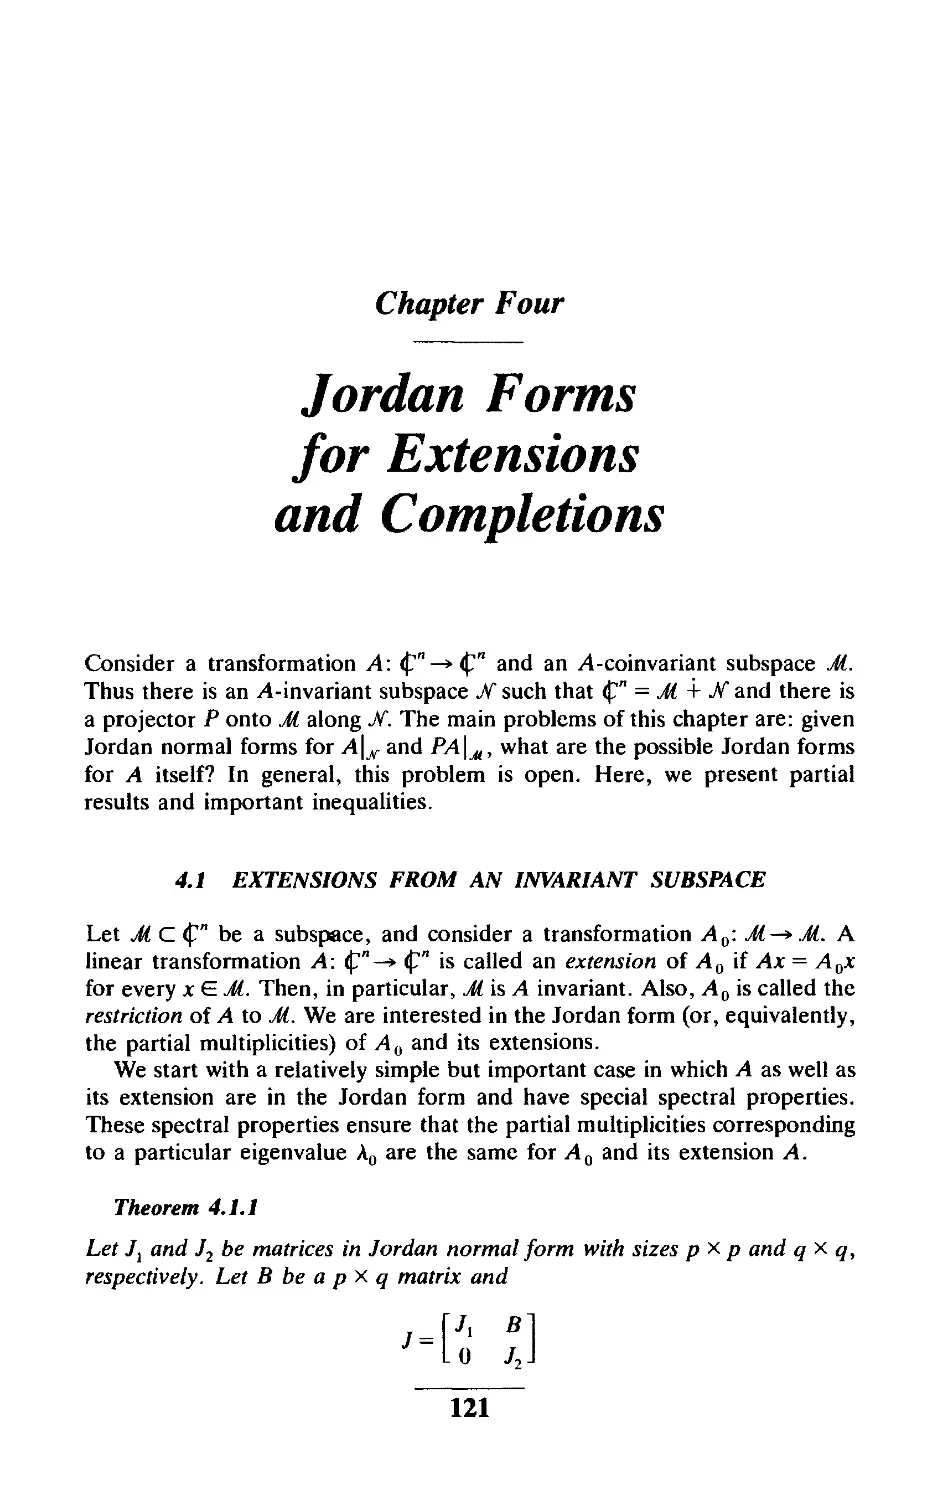 Chapter Four Jordan Forms for Extensions and Completions